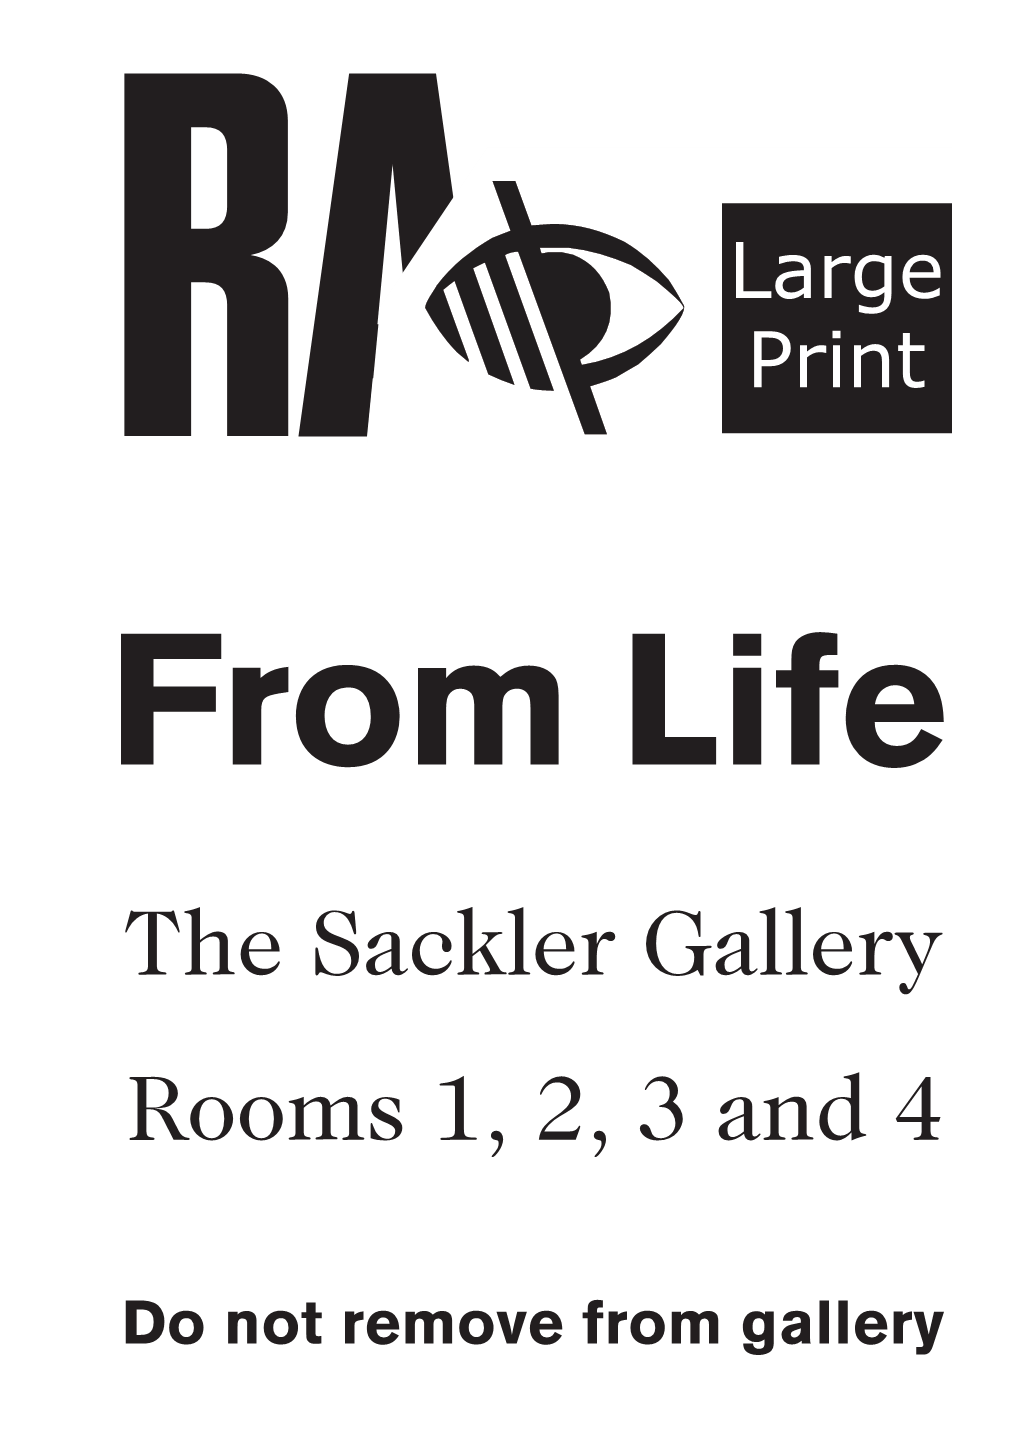 The Sackler Gallery Rooms 1, 2, 3 and 4